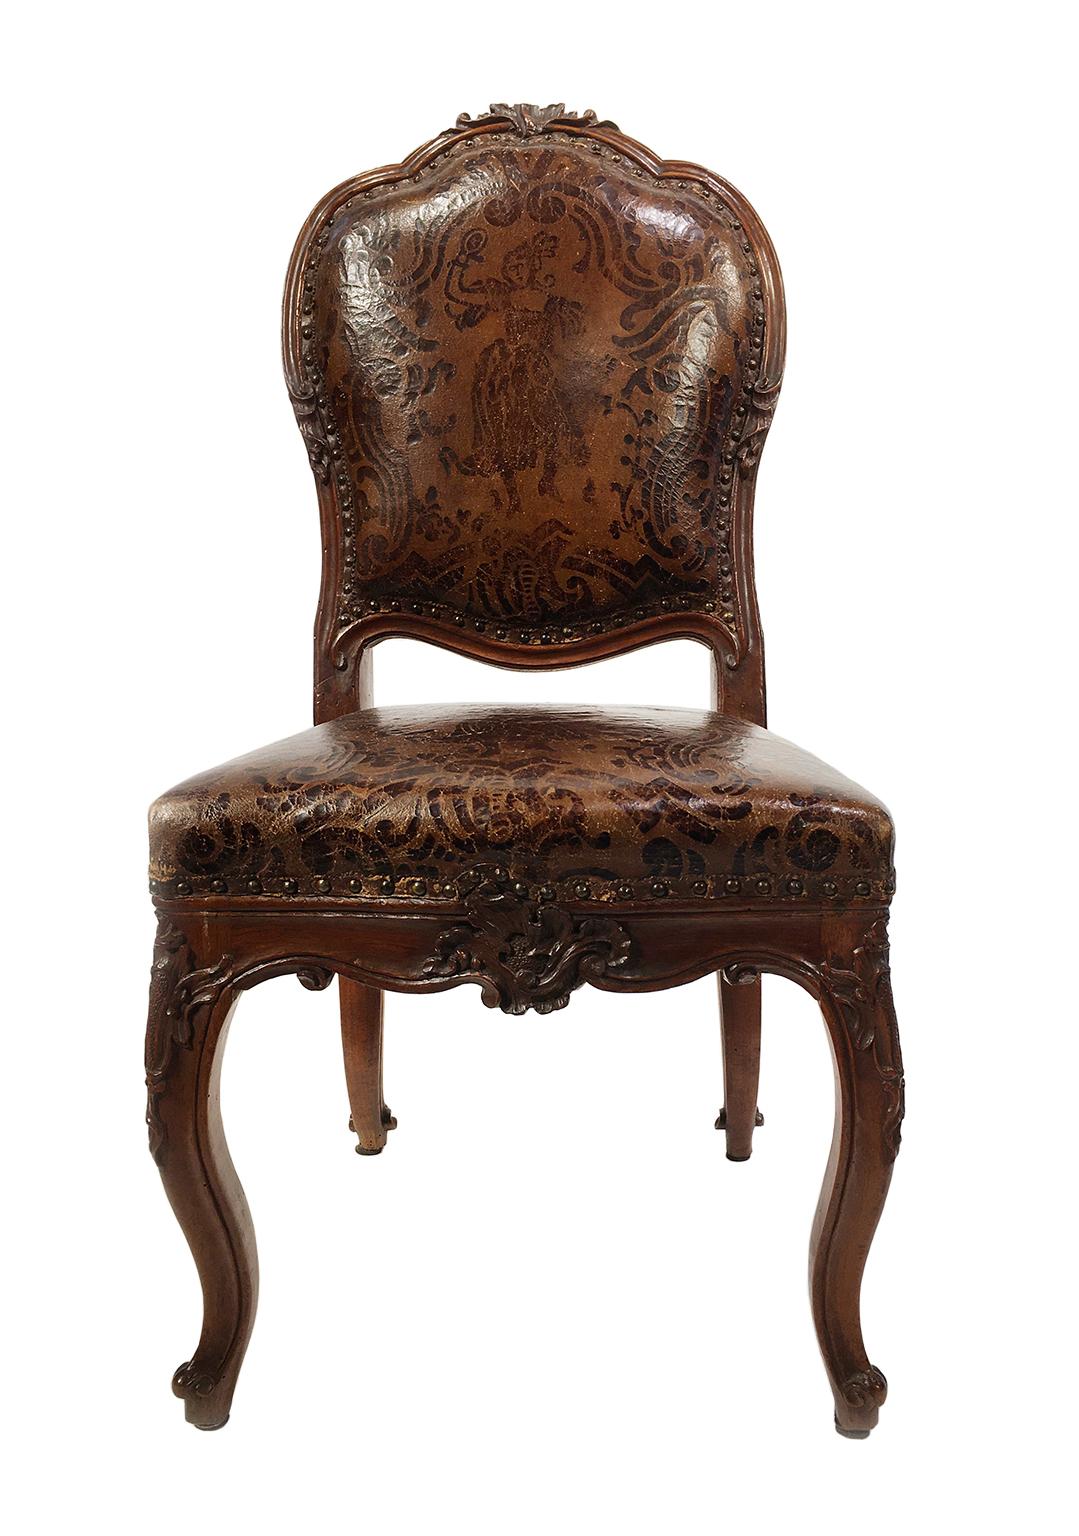 Italian Carved Walnut Chairs with Leather Covers, Milan, circa 1750 In Good Condition For Sale In Milano, IT